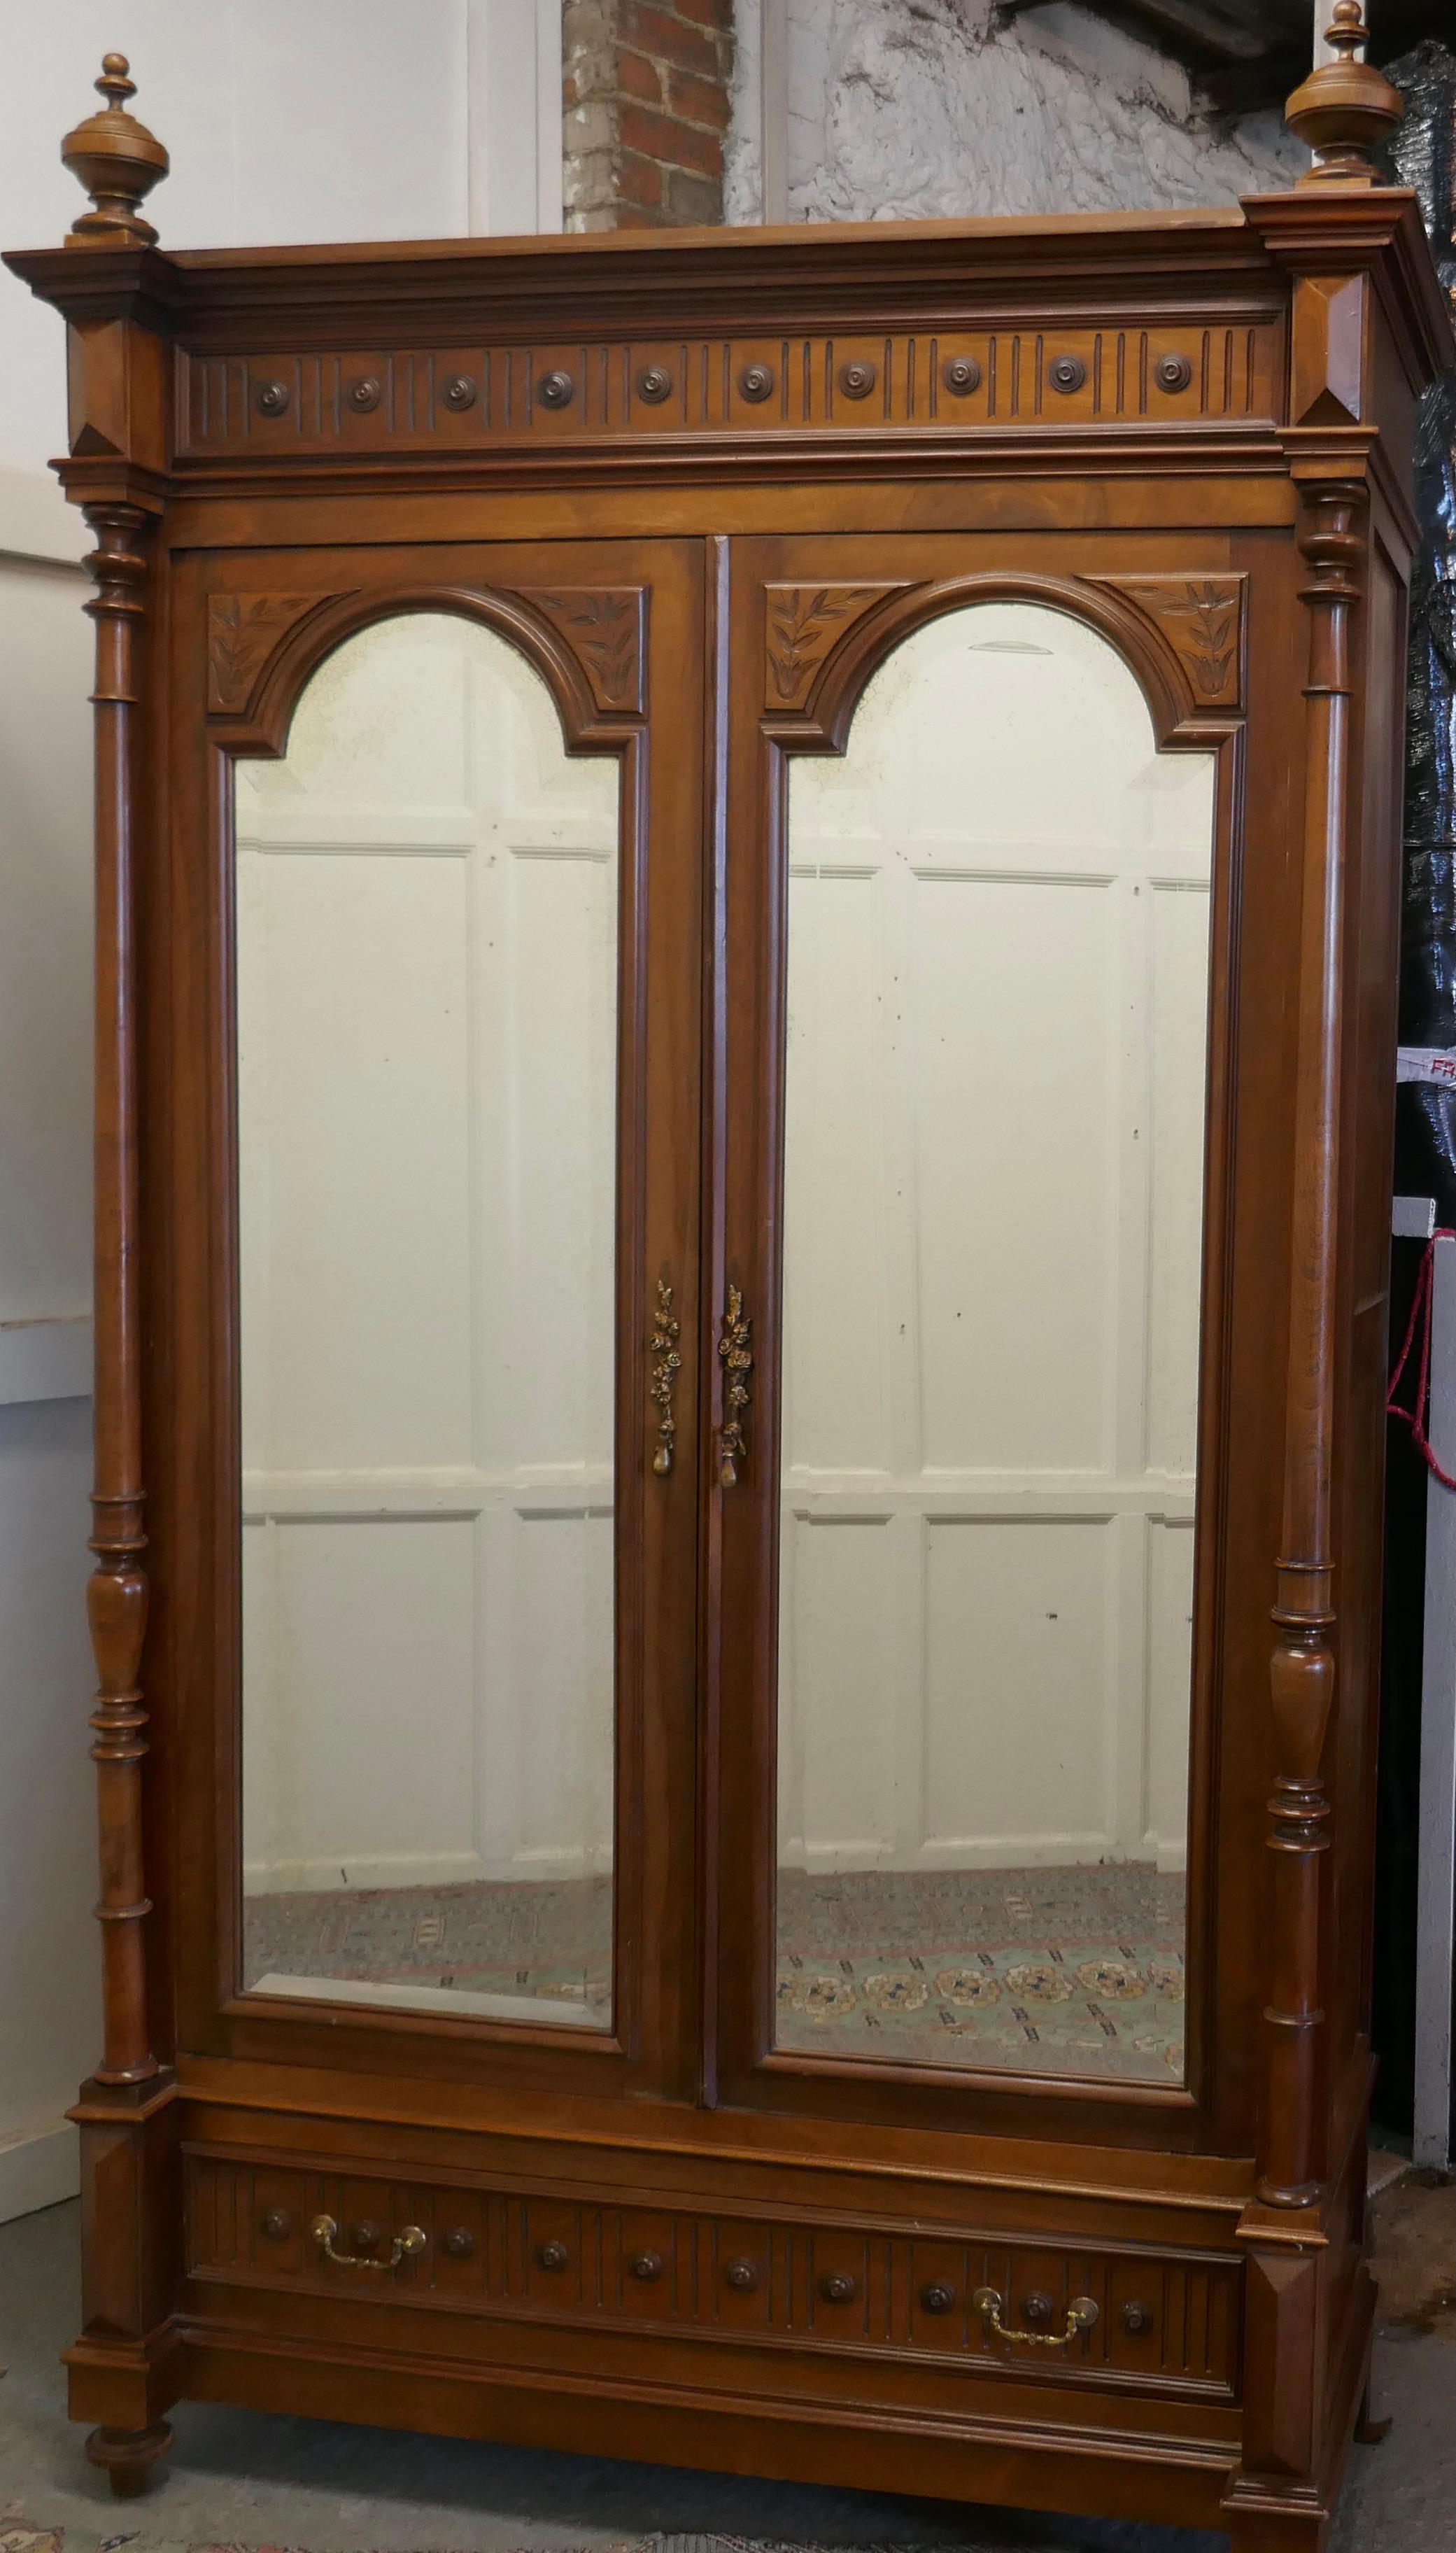 French Arts & Crafts walnut mirror double door armoire 

This is a good quality tall piece not surprising as it is made in figured walnut and has 2 mirrored Doors with a drawer at the bottom, inside there is a tall storage shelf and a hanging rail